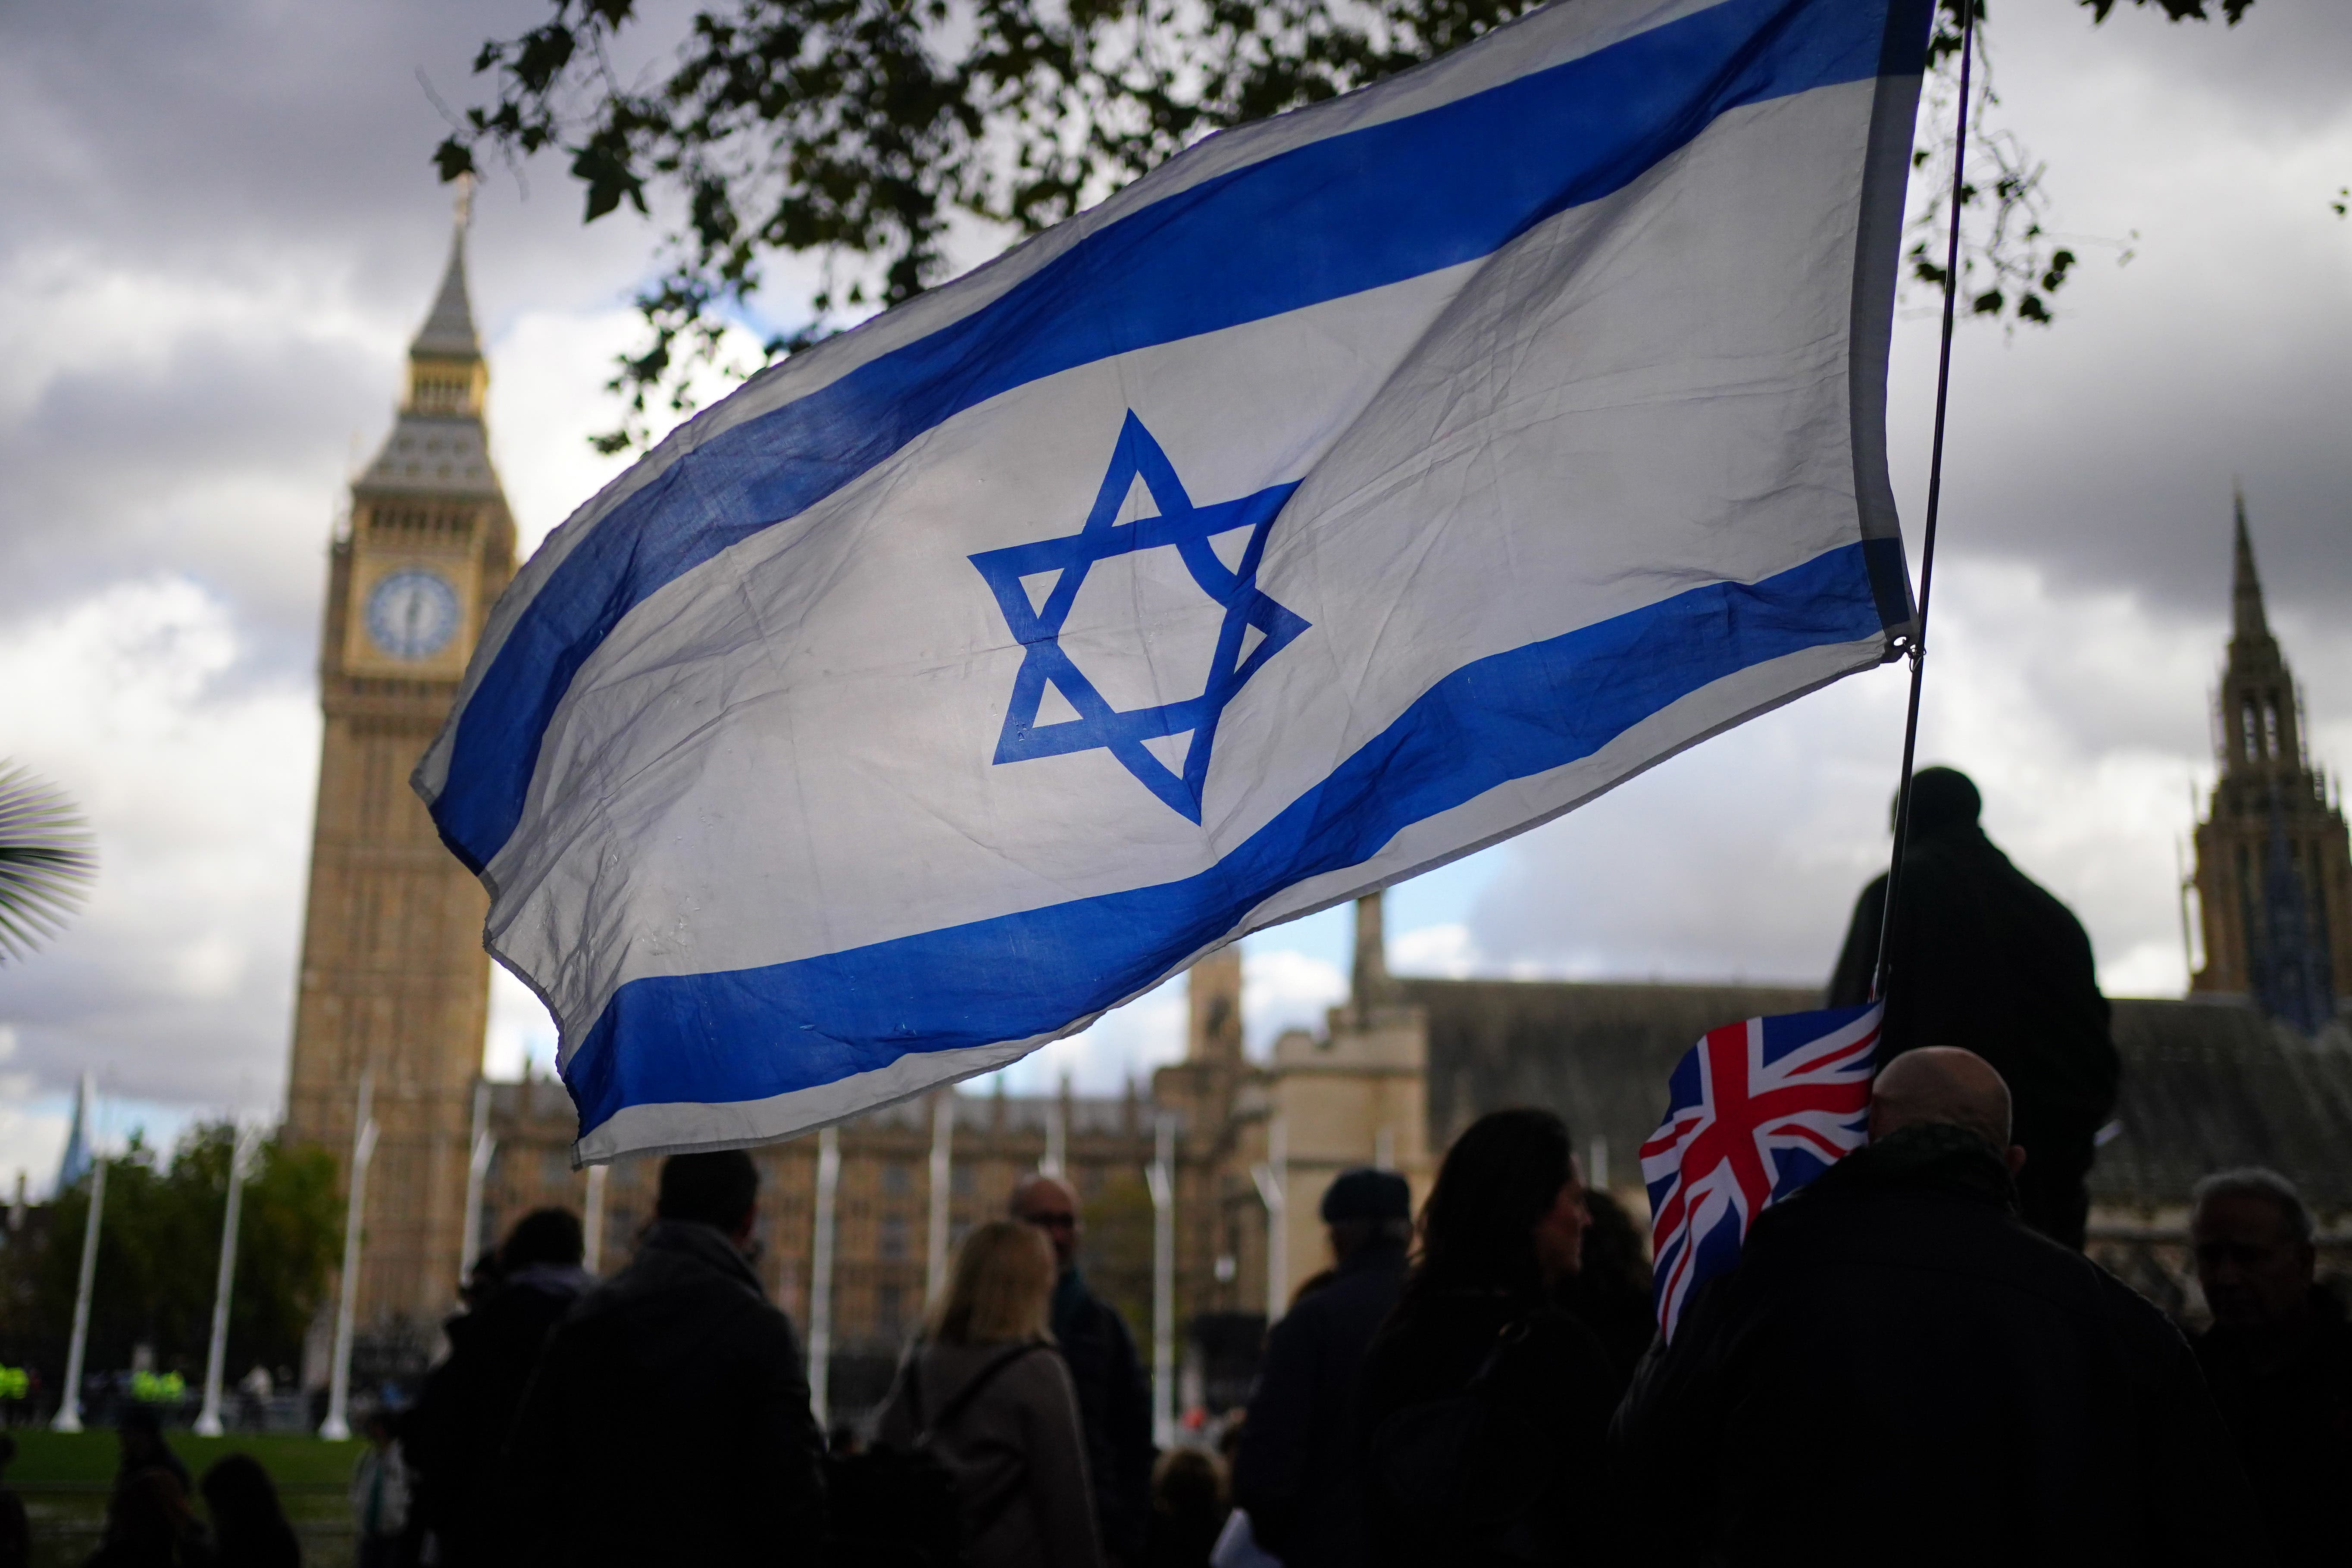 Around 40,000 to 50,000 people are expected to attend the event organised by charity Campaign Against Antisemitism (Victoria Jones/PA)